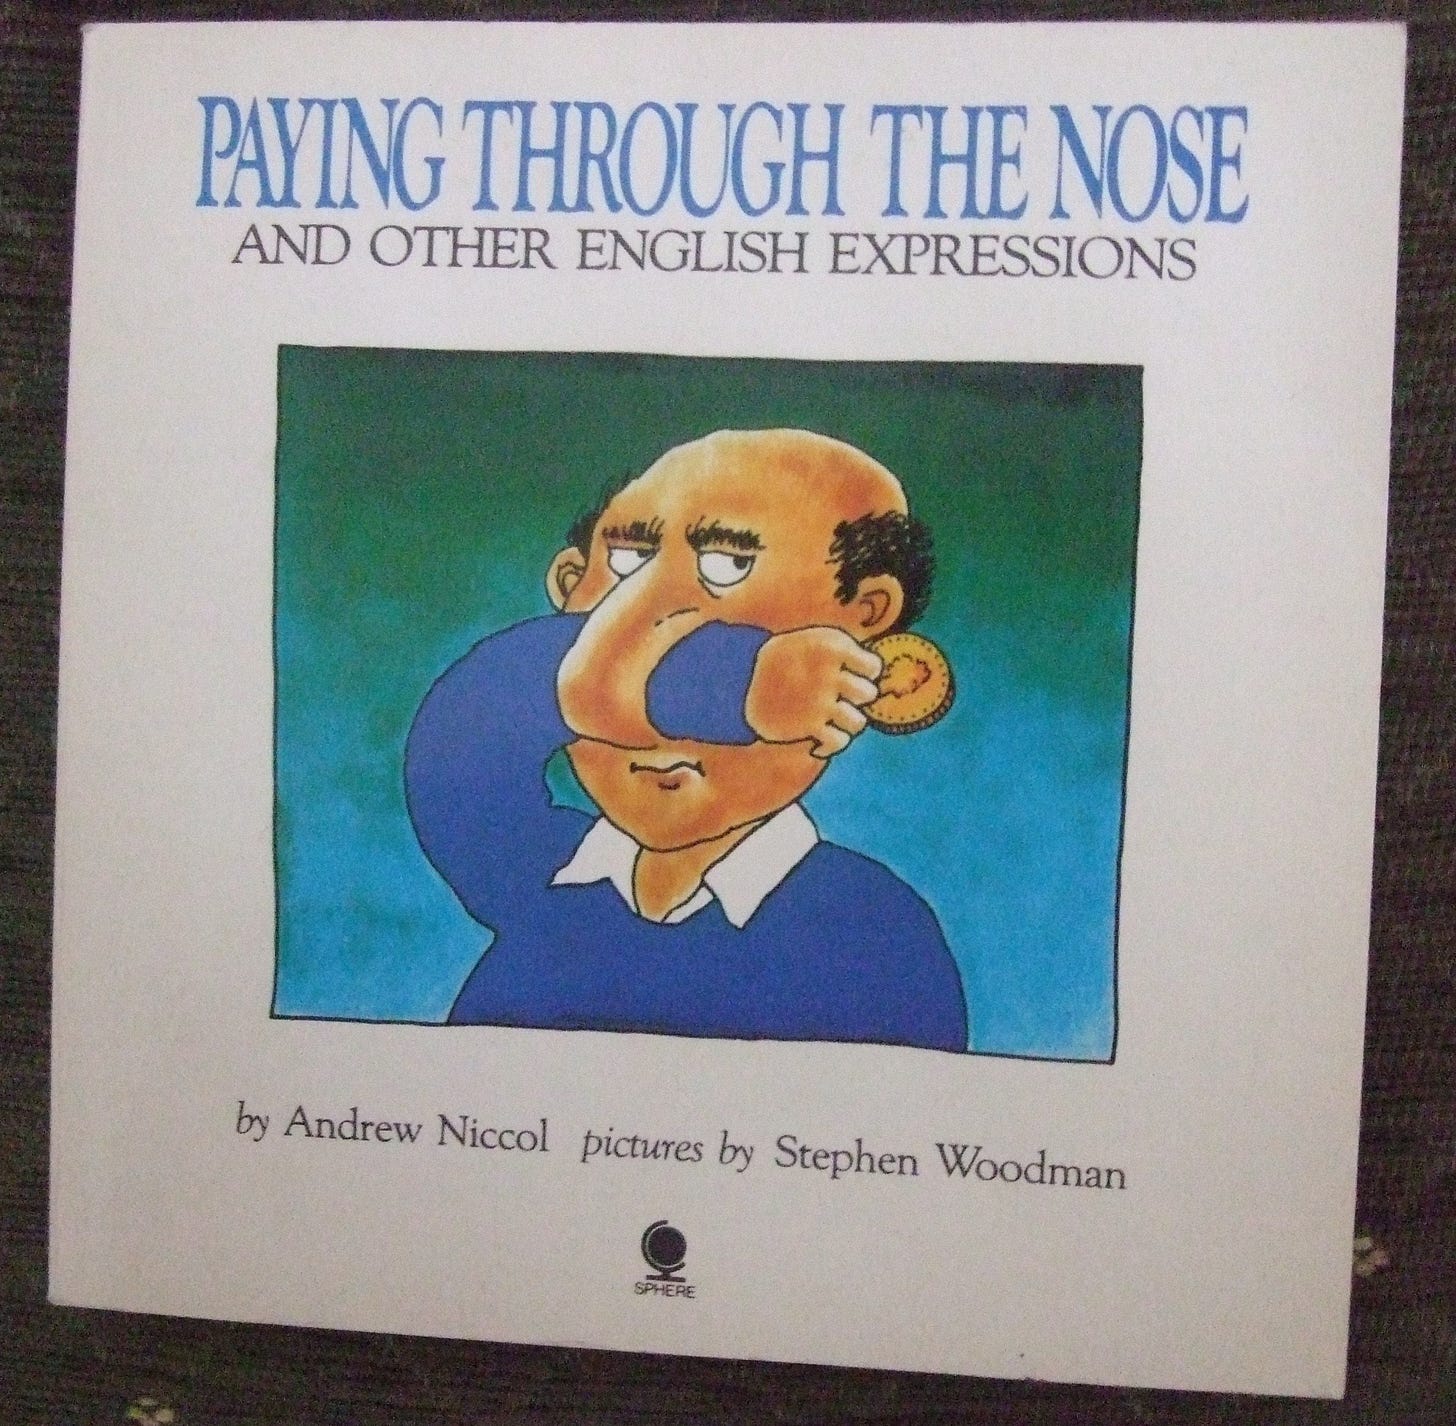 Paying Through the Nose and Other English Expressions: Amazon.co.uk:  Niccol, Andrew, Woodman, S.: 9780722163740: Books